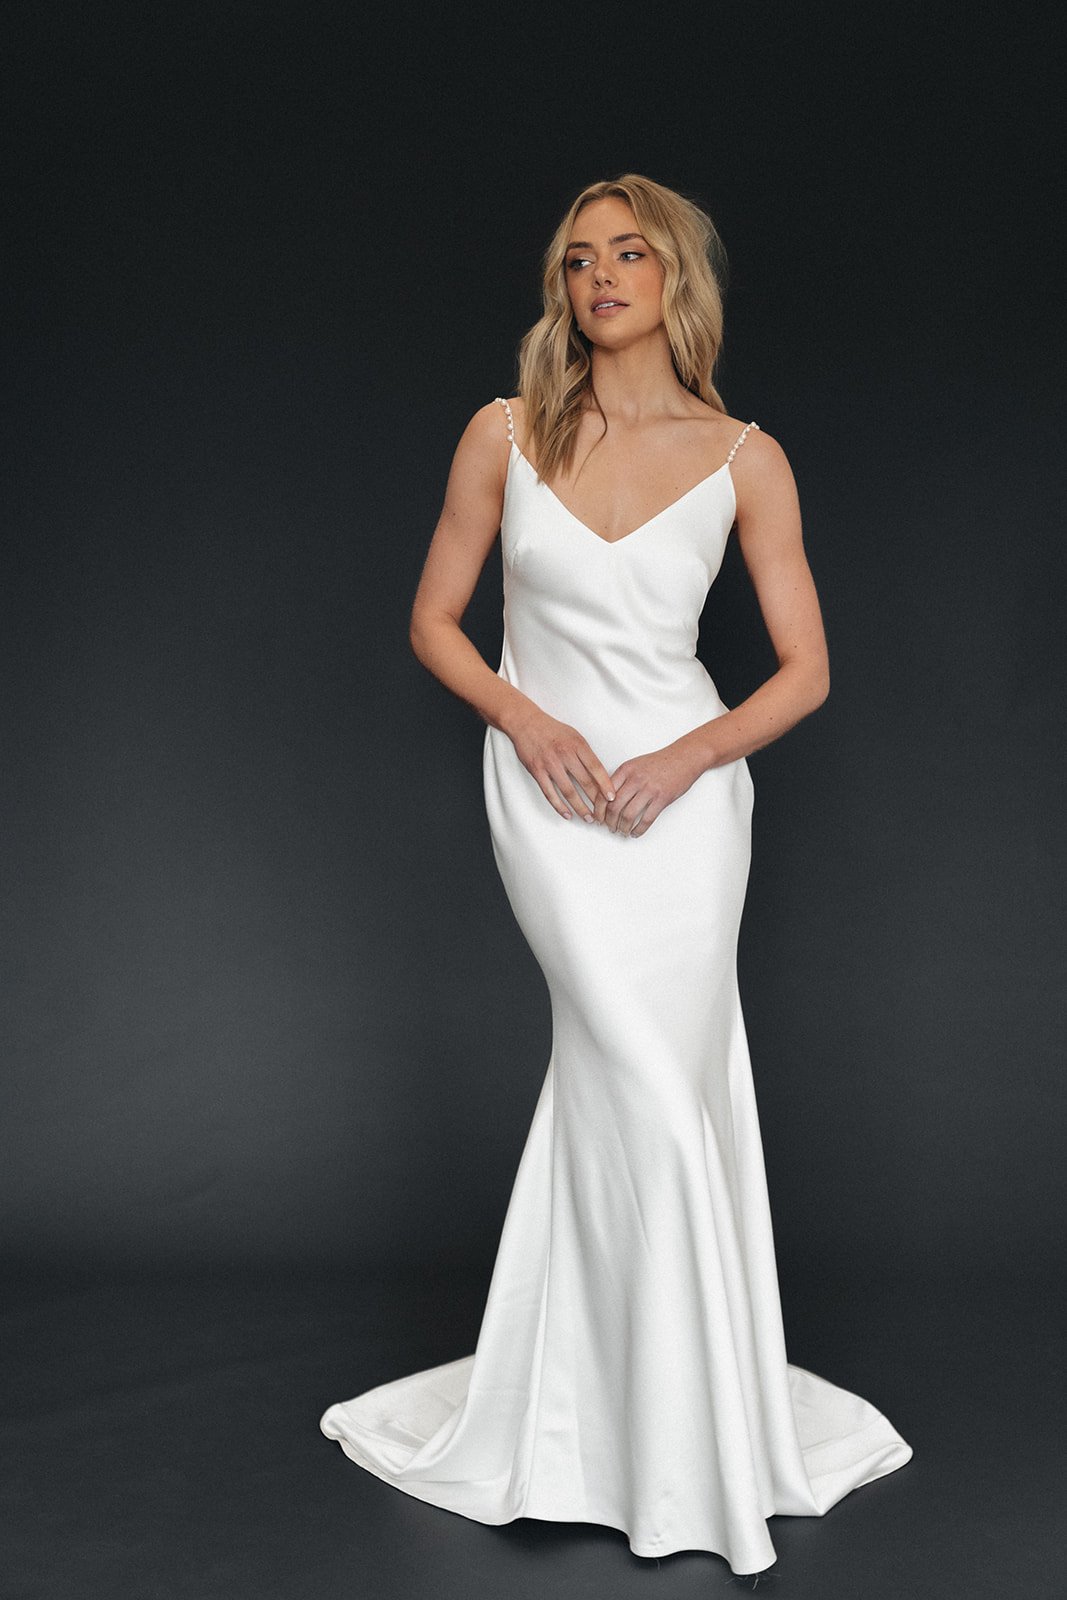 Moira Hughes Couture The Hamilton Modern wedding Dress with Pearl Straps.jpg